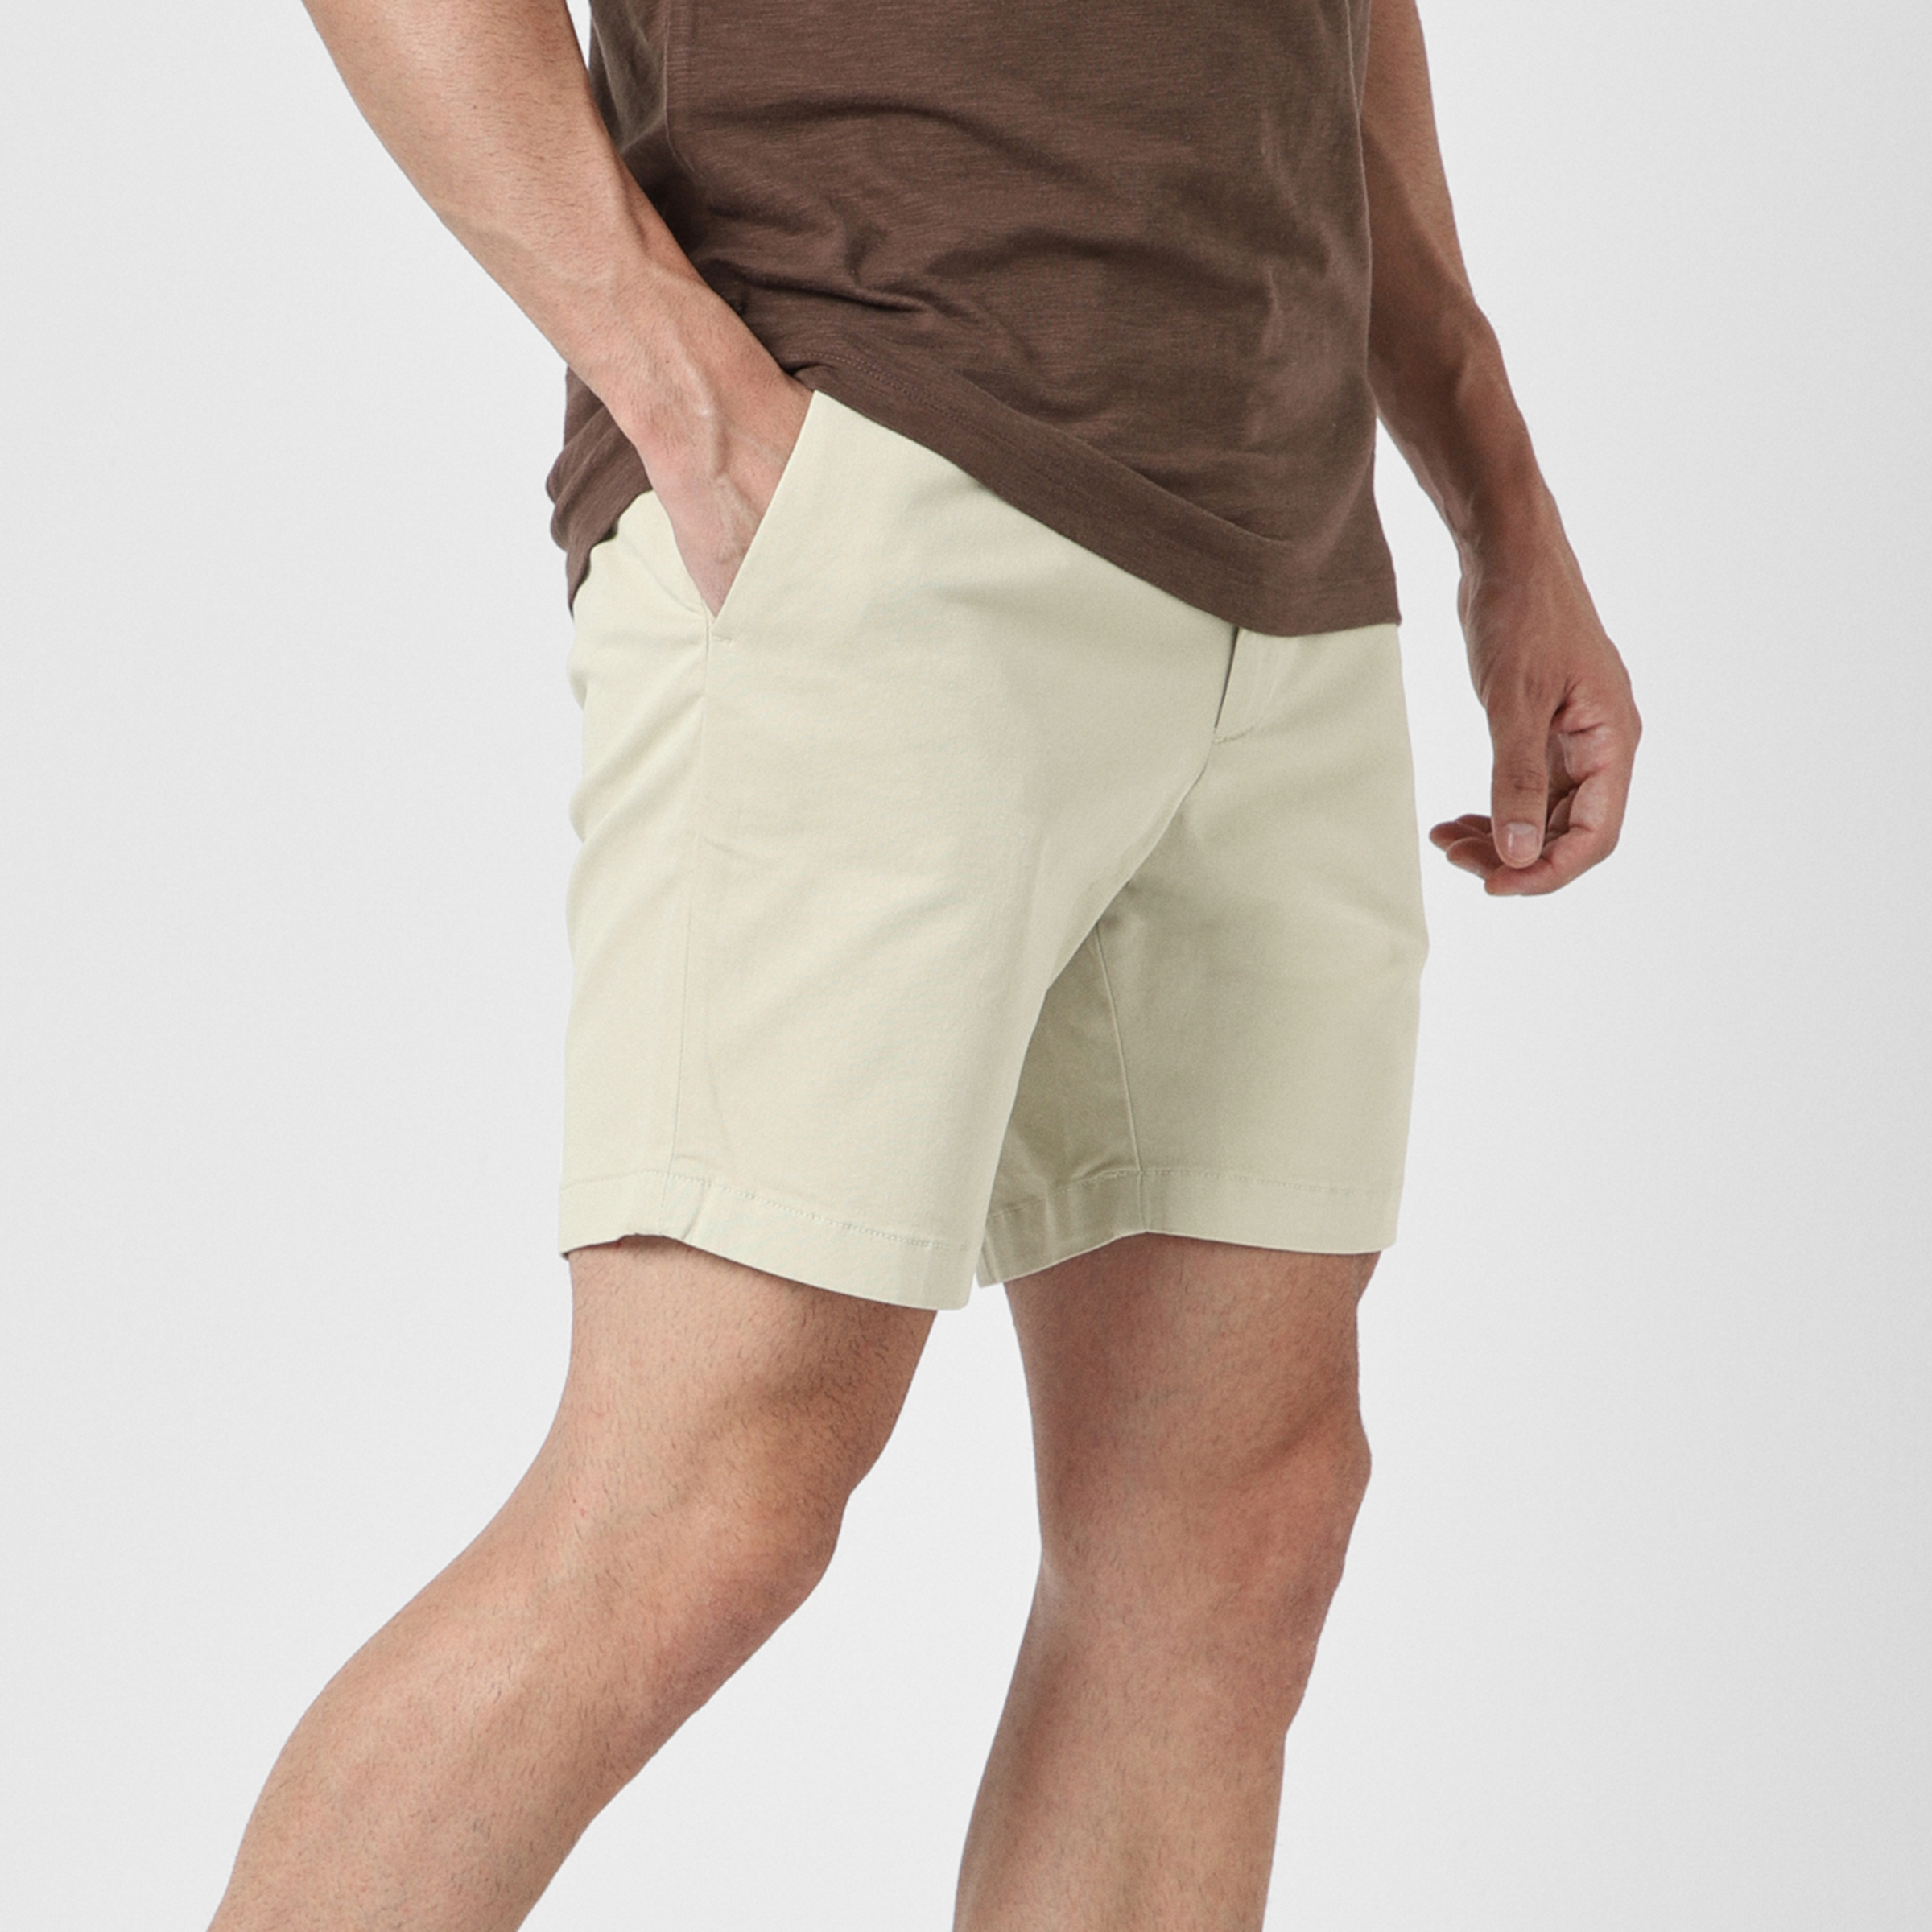 Stretch Chino Short 7" in Stone right side on model